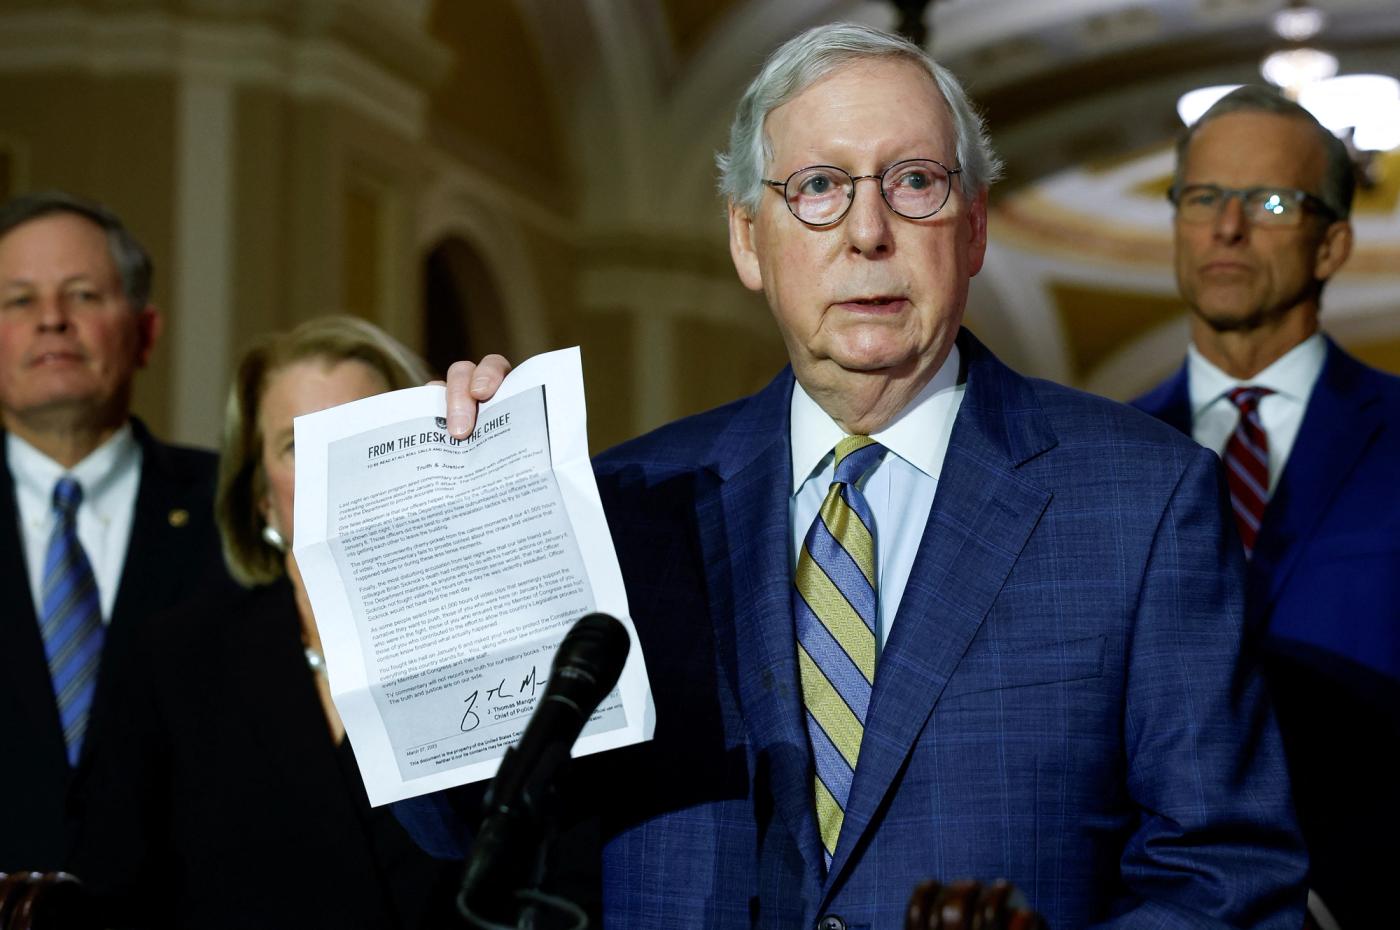 Senate Minority Leader Mitch McConnell states his support for the written opinion of the Chief of the U.S. Capitol Police denouncing the Fox News presentation of the events of January 6th.